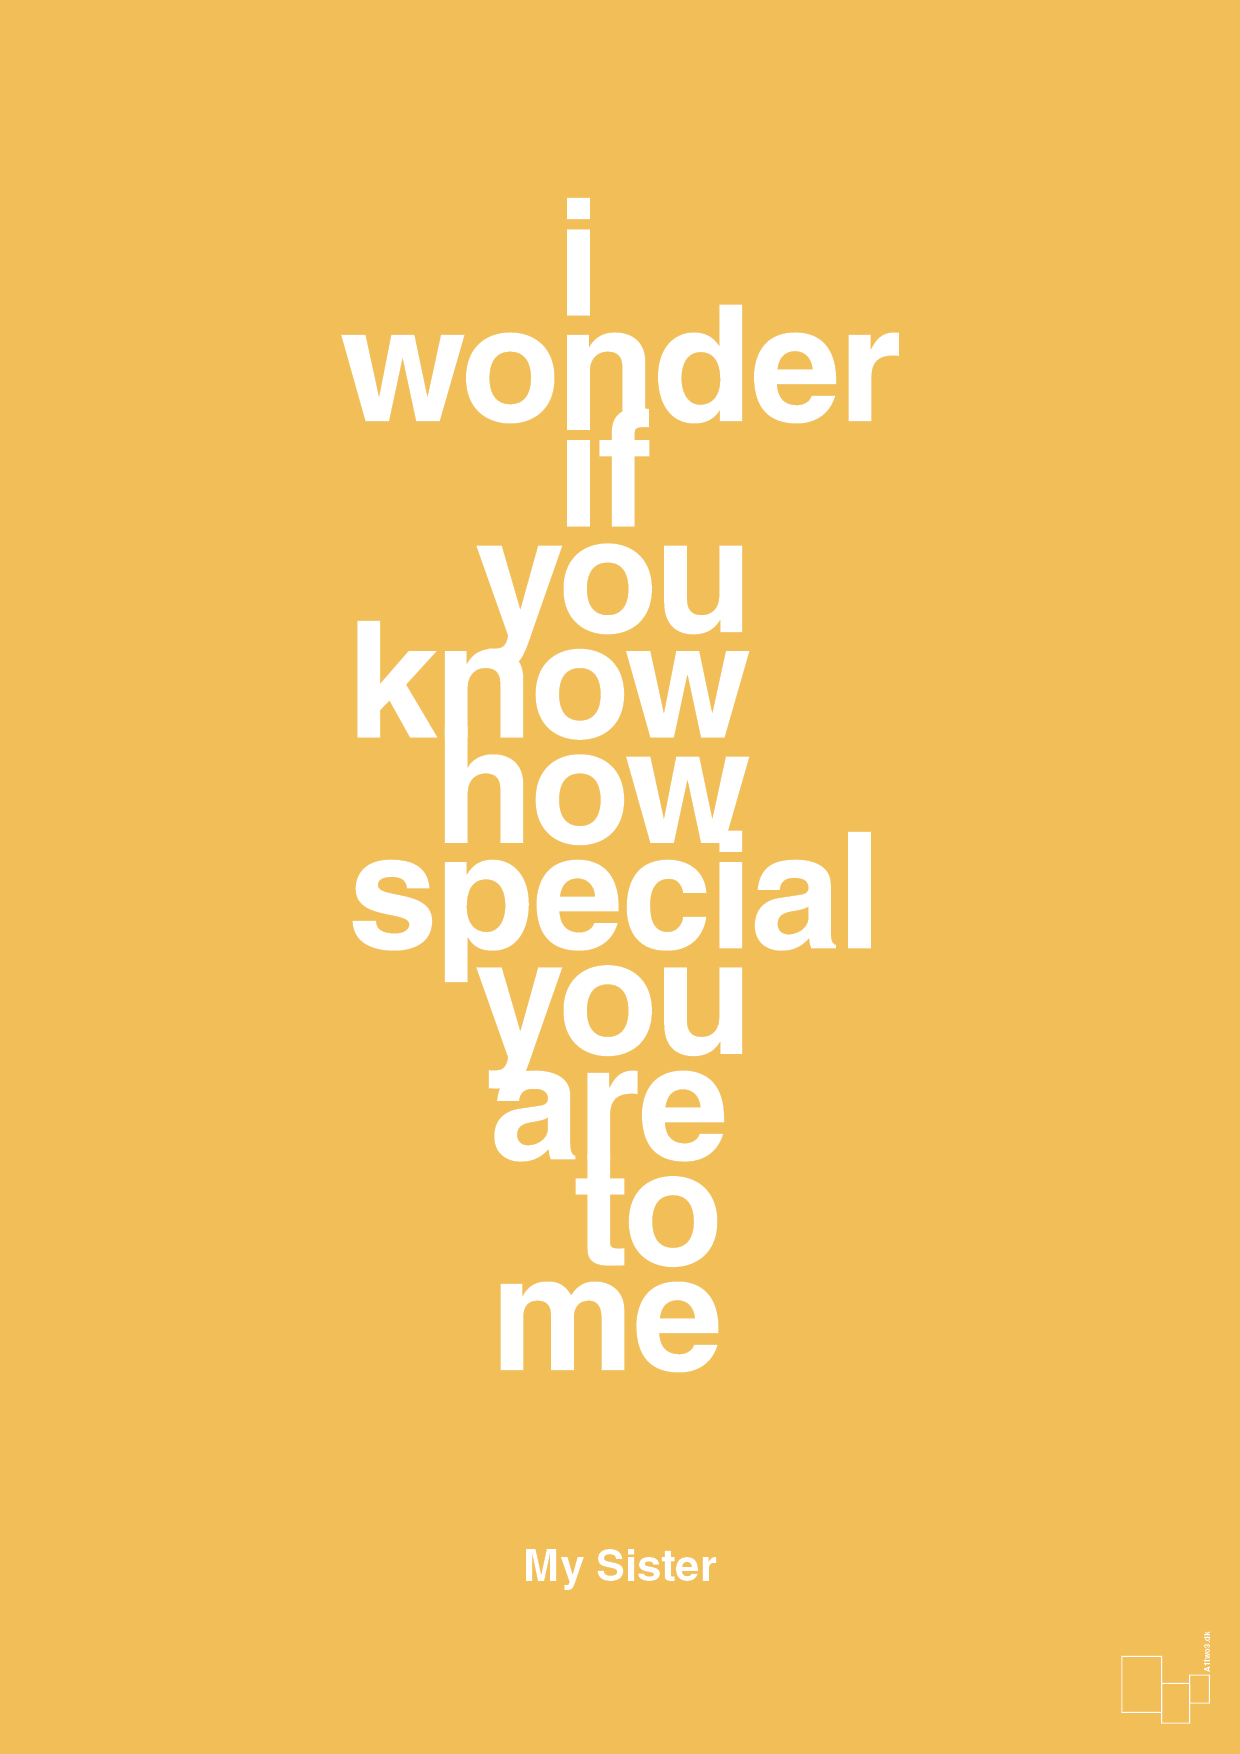 my sister - i wonder if you know how special you are to me - Plakat med Citater i Honeycomb